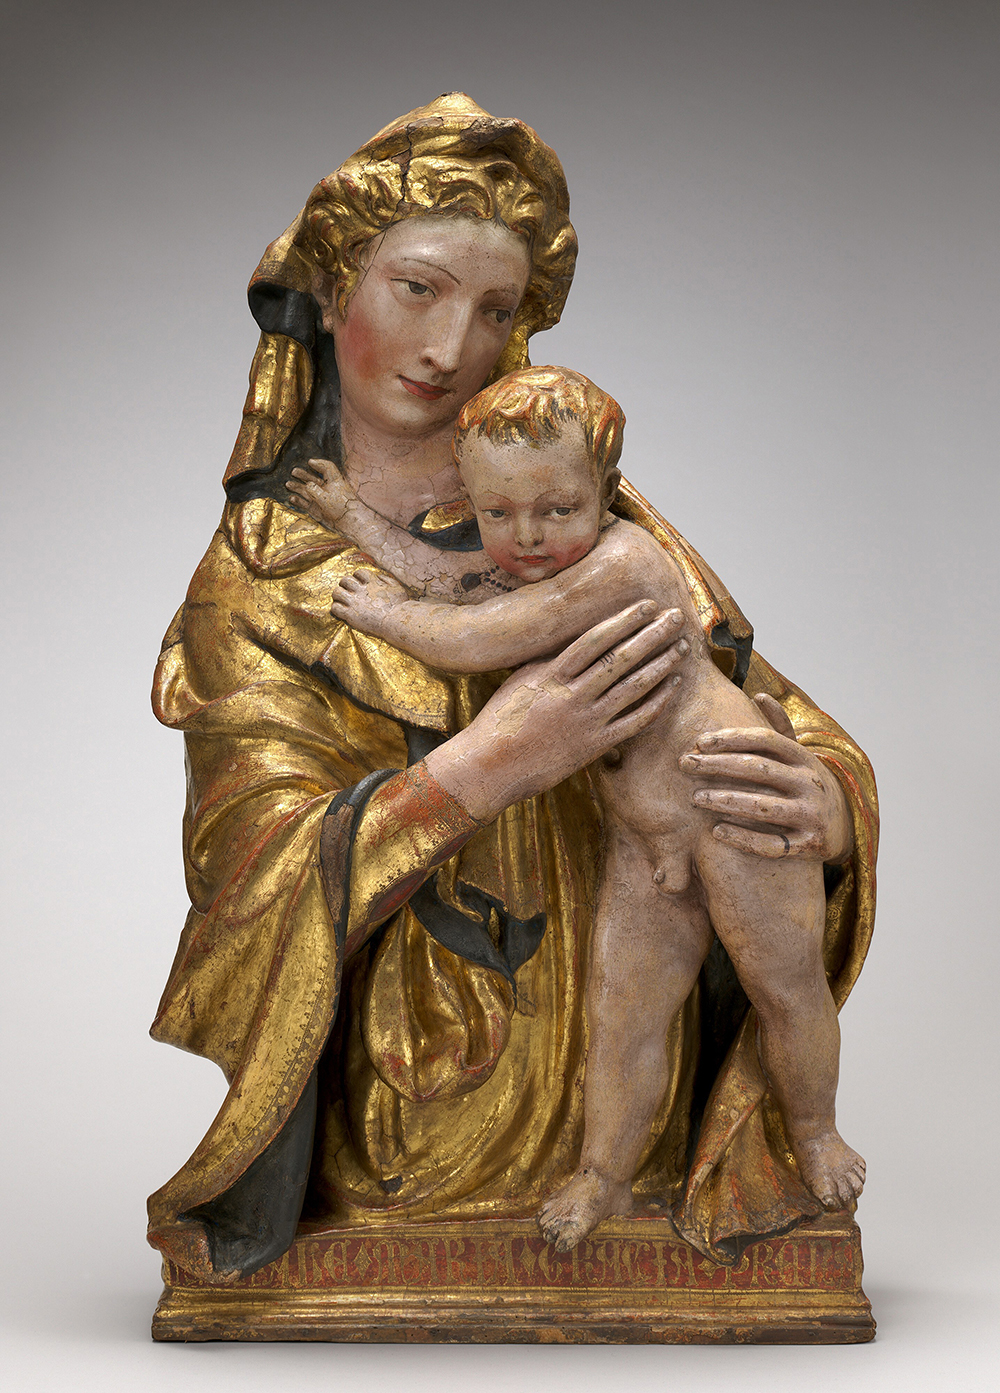 Sculpture of the Madonna and Child, painted and gilded terracotta